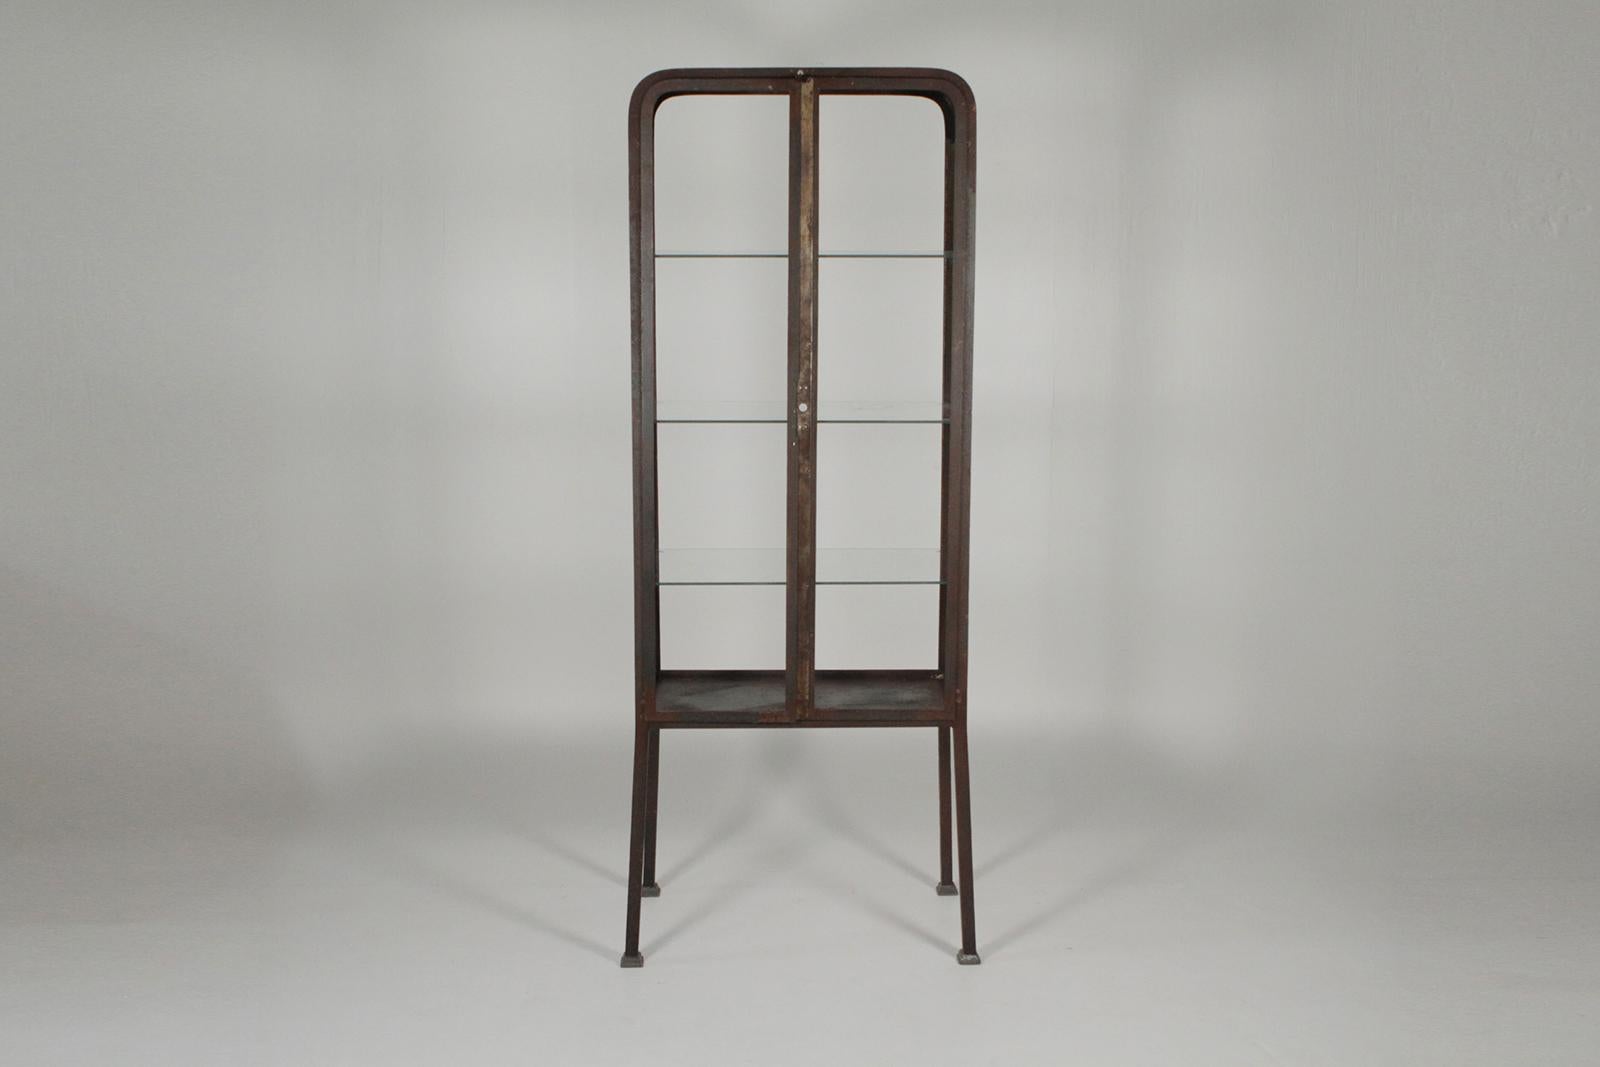 Vintage medical cabinet with a weathered rusted steel finish now as a bar. The doors are intentionally made stationary and the glass on all sides having been removed for easy access and use as a bar. Marked Buenos Aires on the underside 69